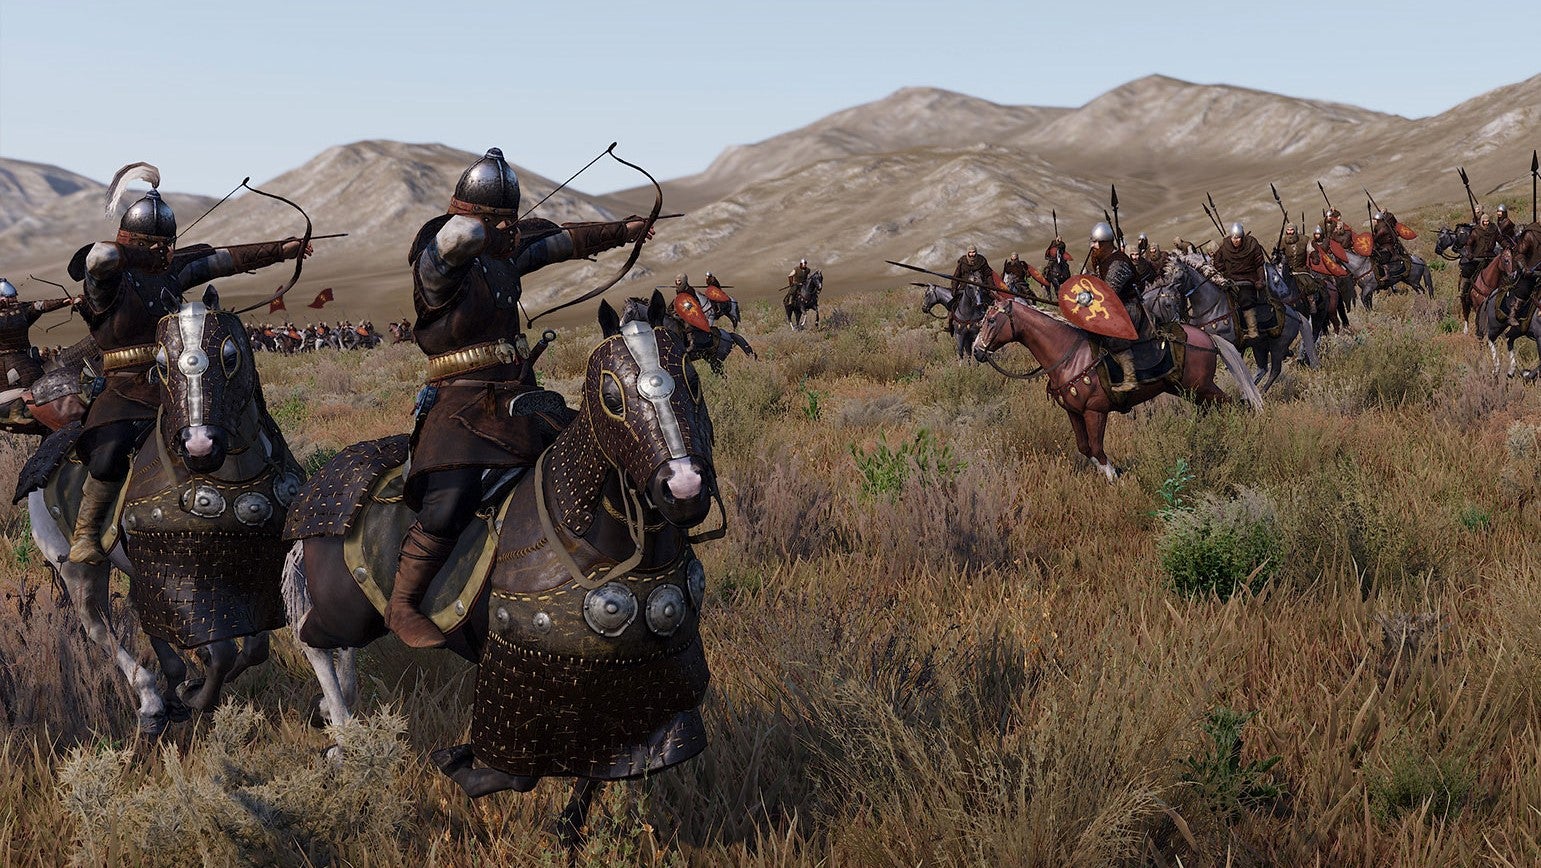 Image for Mount & Blade 2: Bannerlord review: far more cows, but very little fresh butter